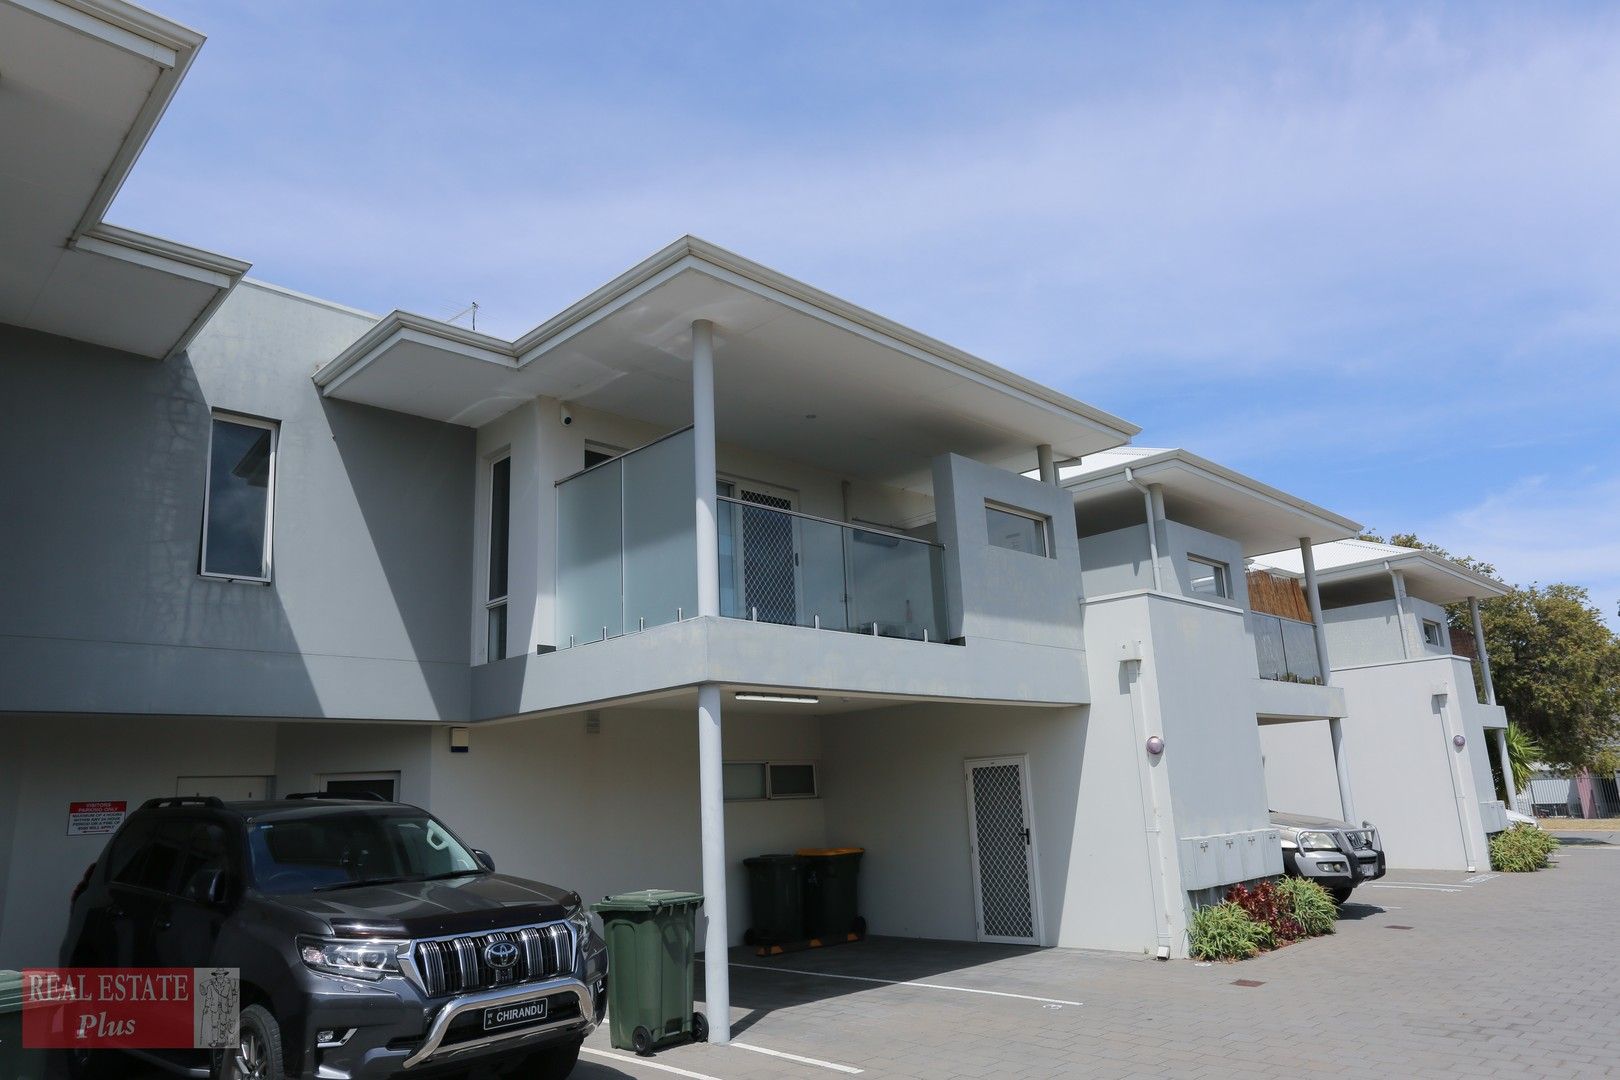 2 bedrooms Townhouse in 8/2A Wroxton Street MIDLAND WA, 6056